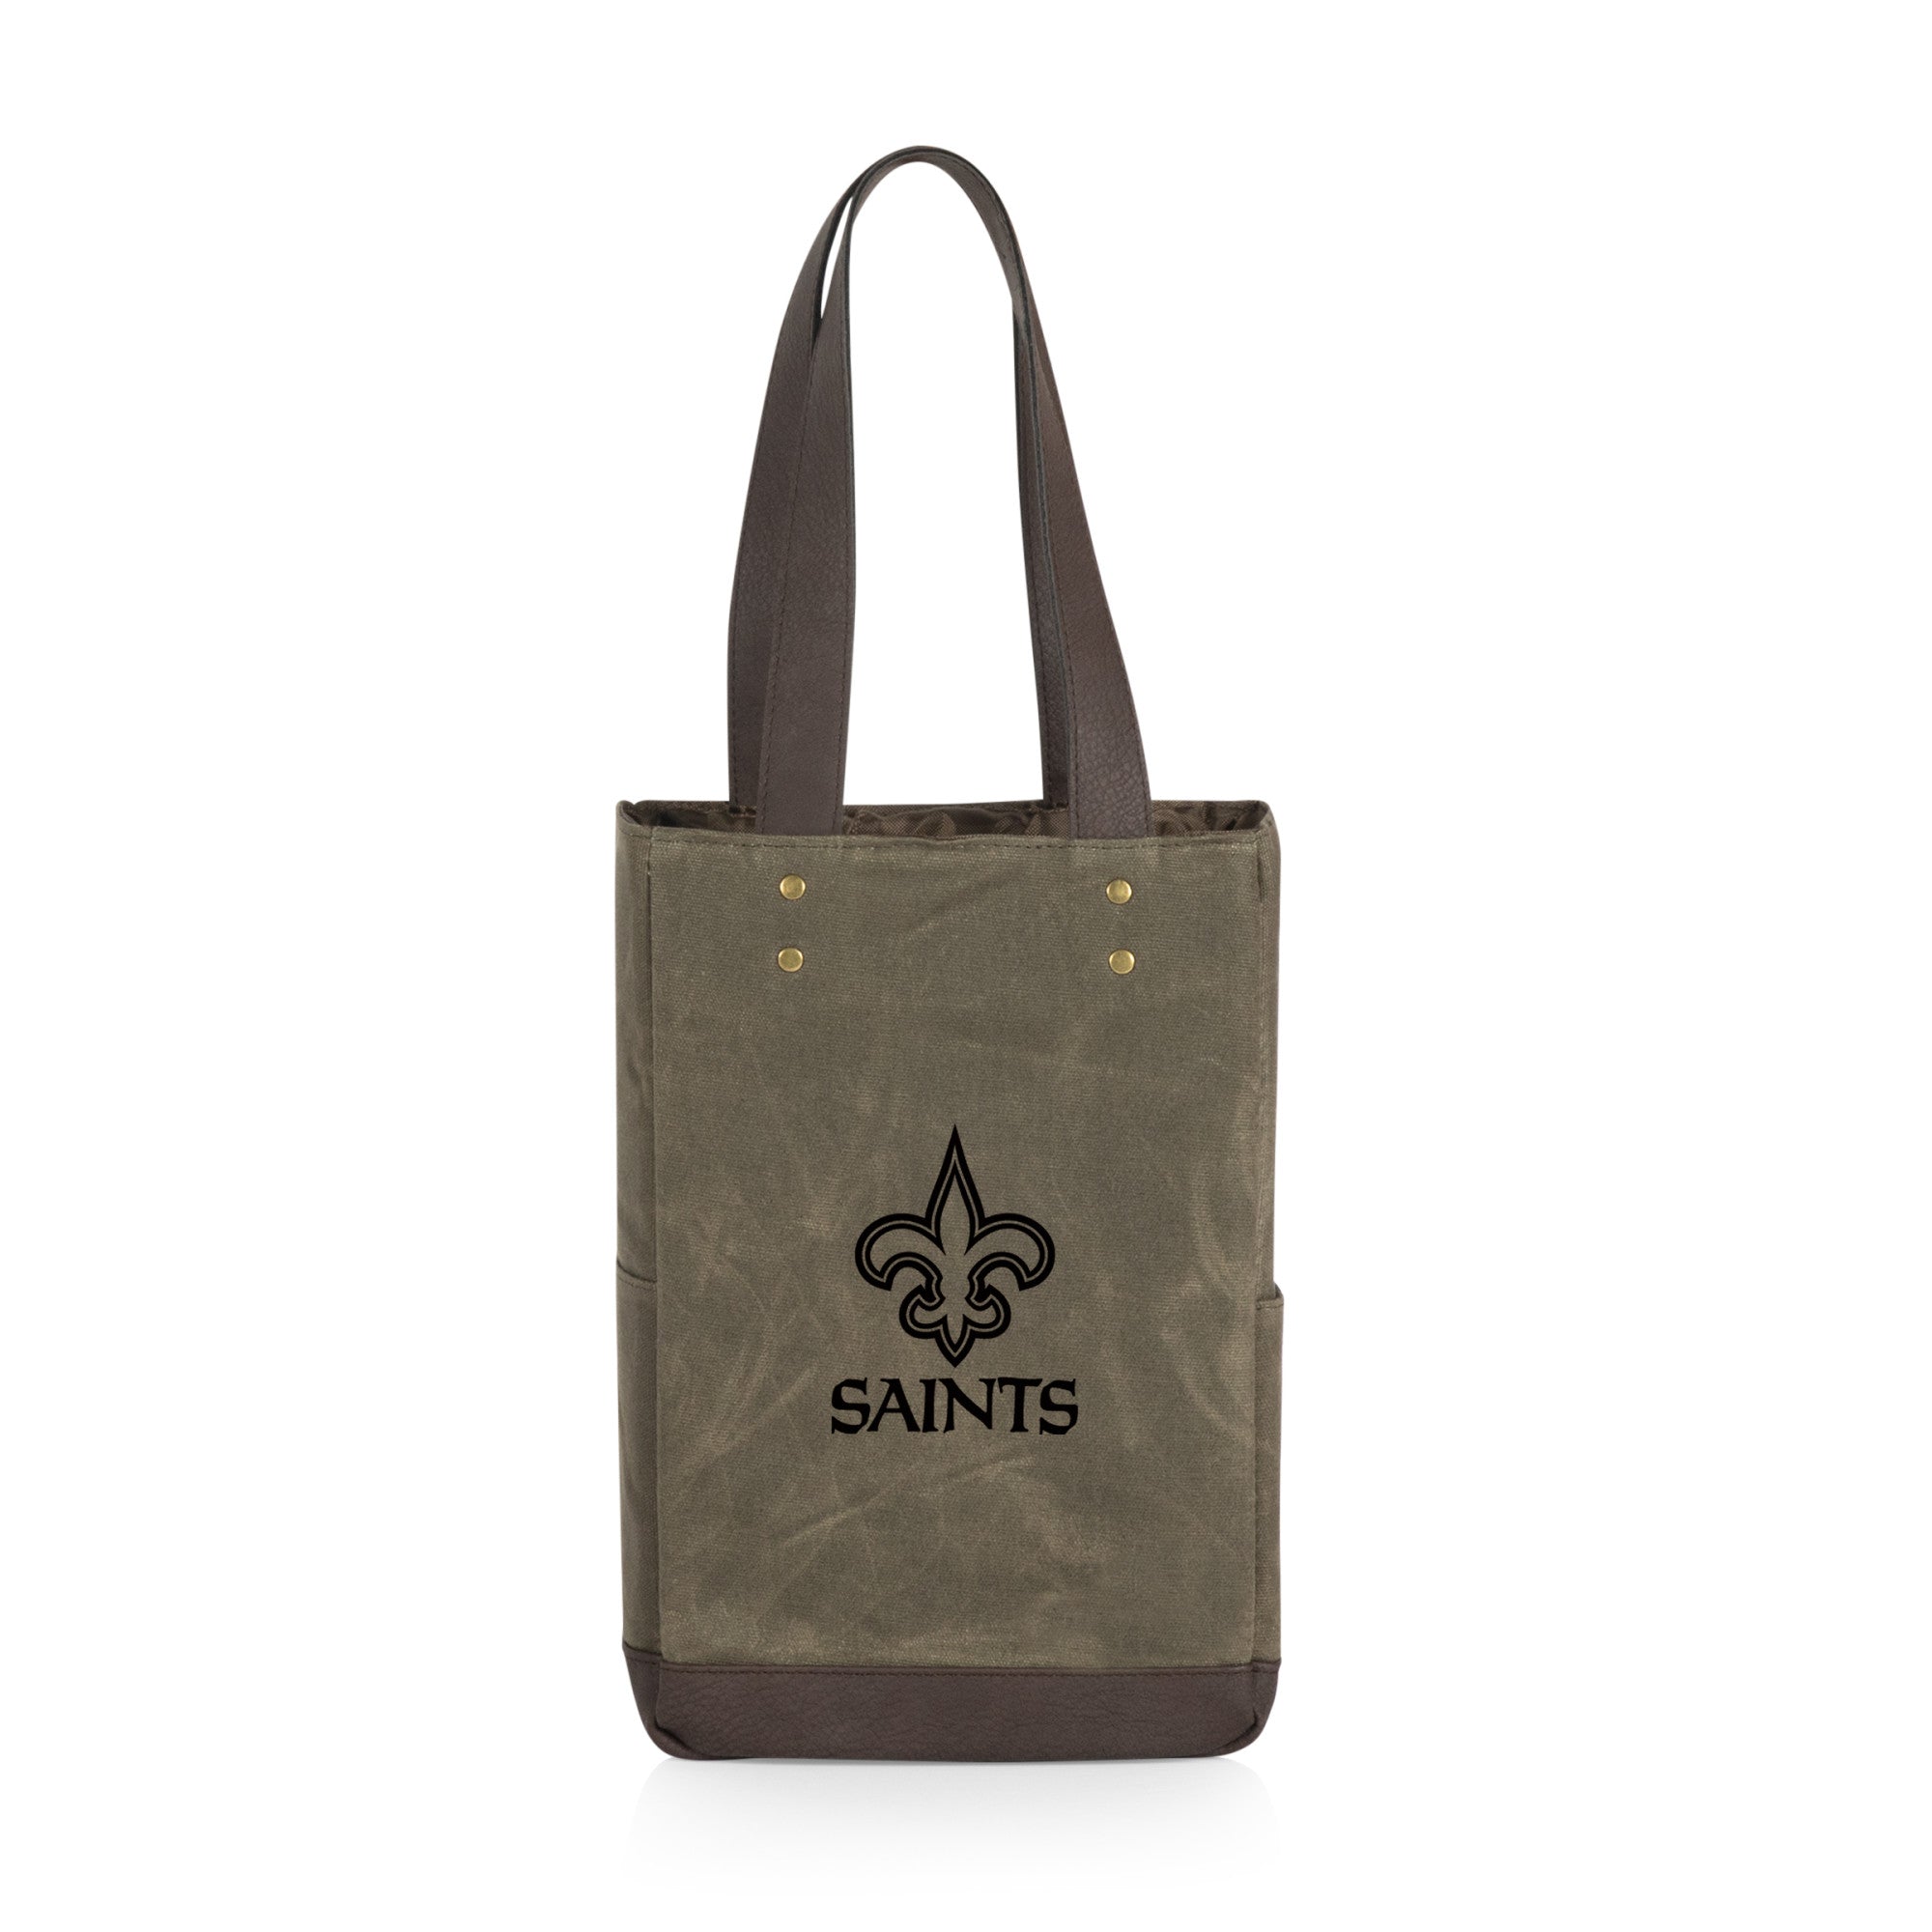 New Orleans Saints - 2 Bottle Insulated Wine Cooler Bag, (Khaki Green with Beige Accents)